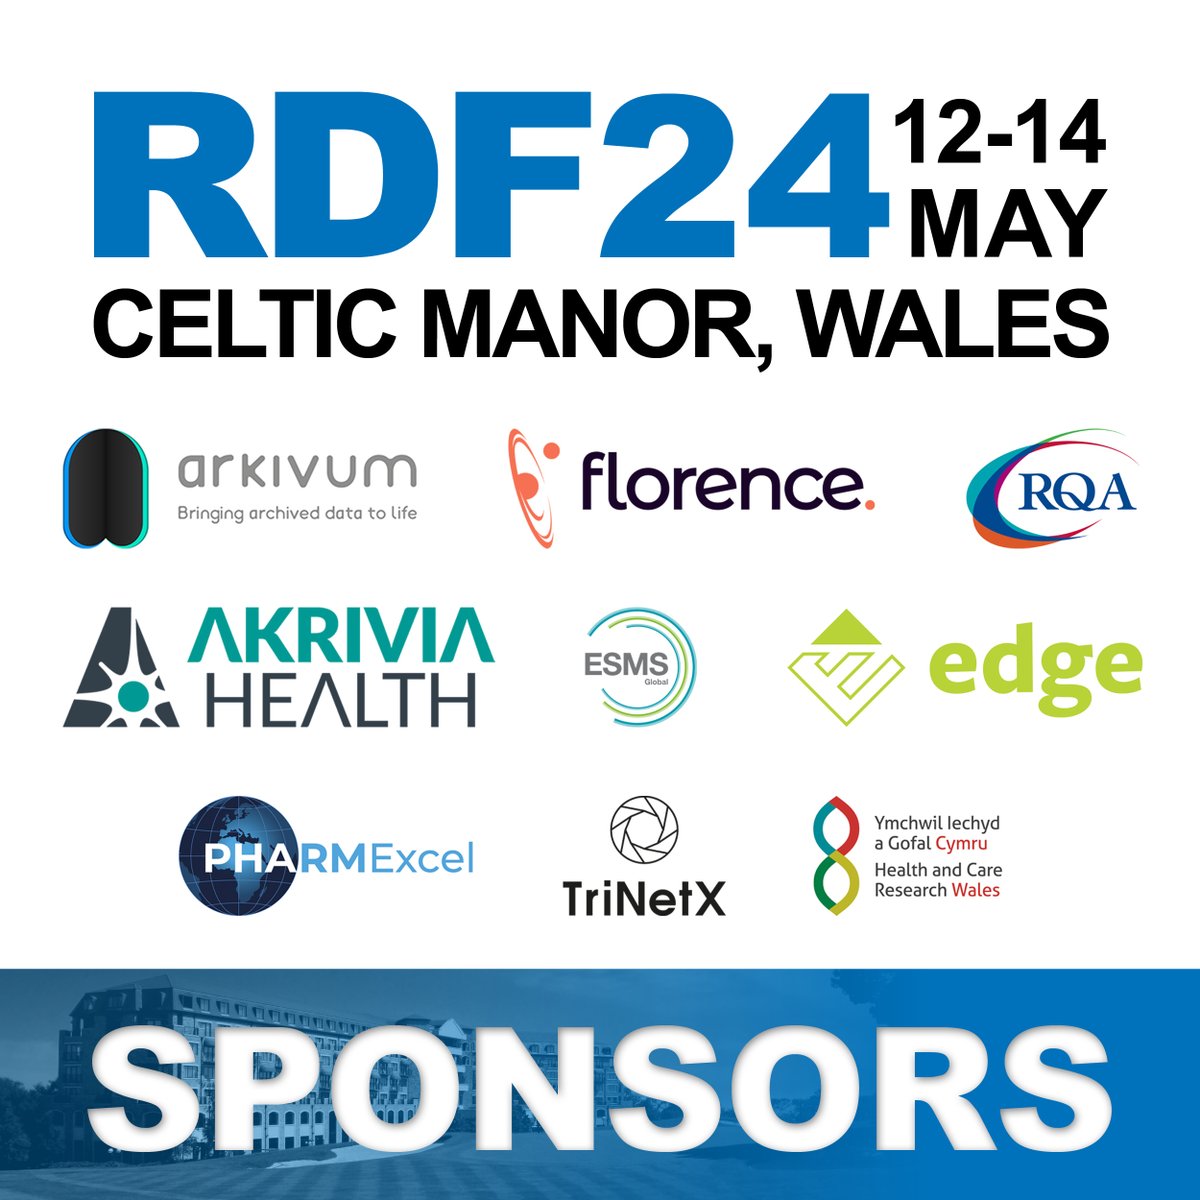 @TheRDForum would like to thank all the Sponsors of the RDF24 Conference for their support: > @Arkivum > Florence Healthcare > @The_RQA > @AkriviaHealth > @EsmsGlobal > @EDGEclinical > @PHARMExcel1 > @TriNetX > @ResearchWales #RDF24 #HealthcareResearch #UKHealthcare